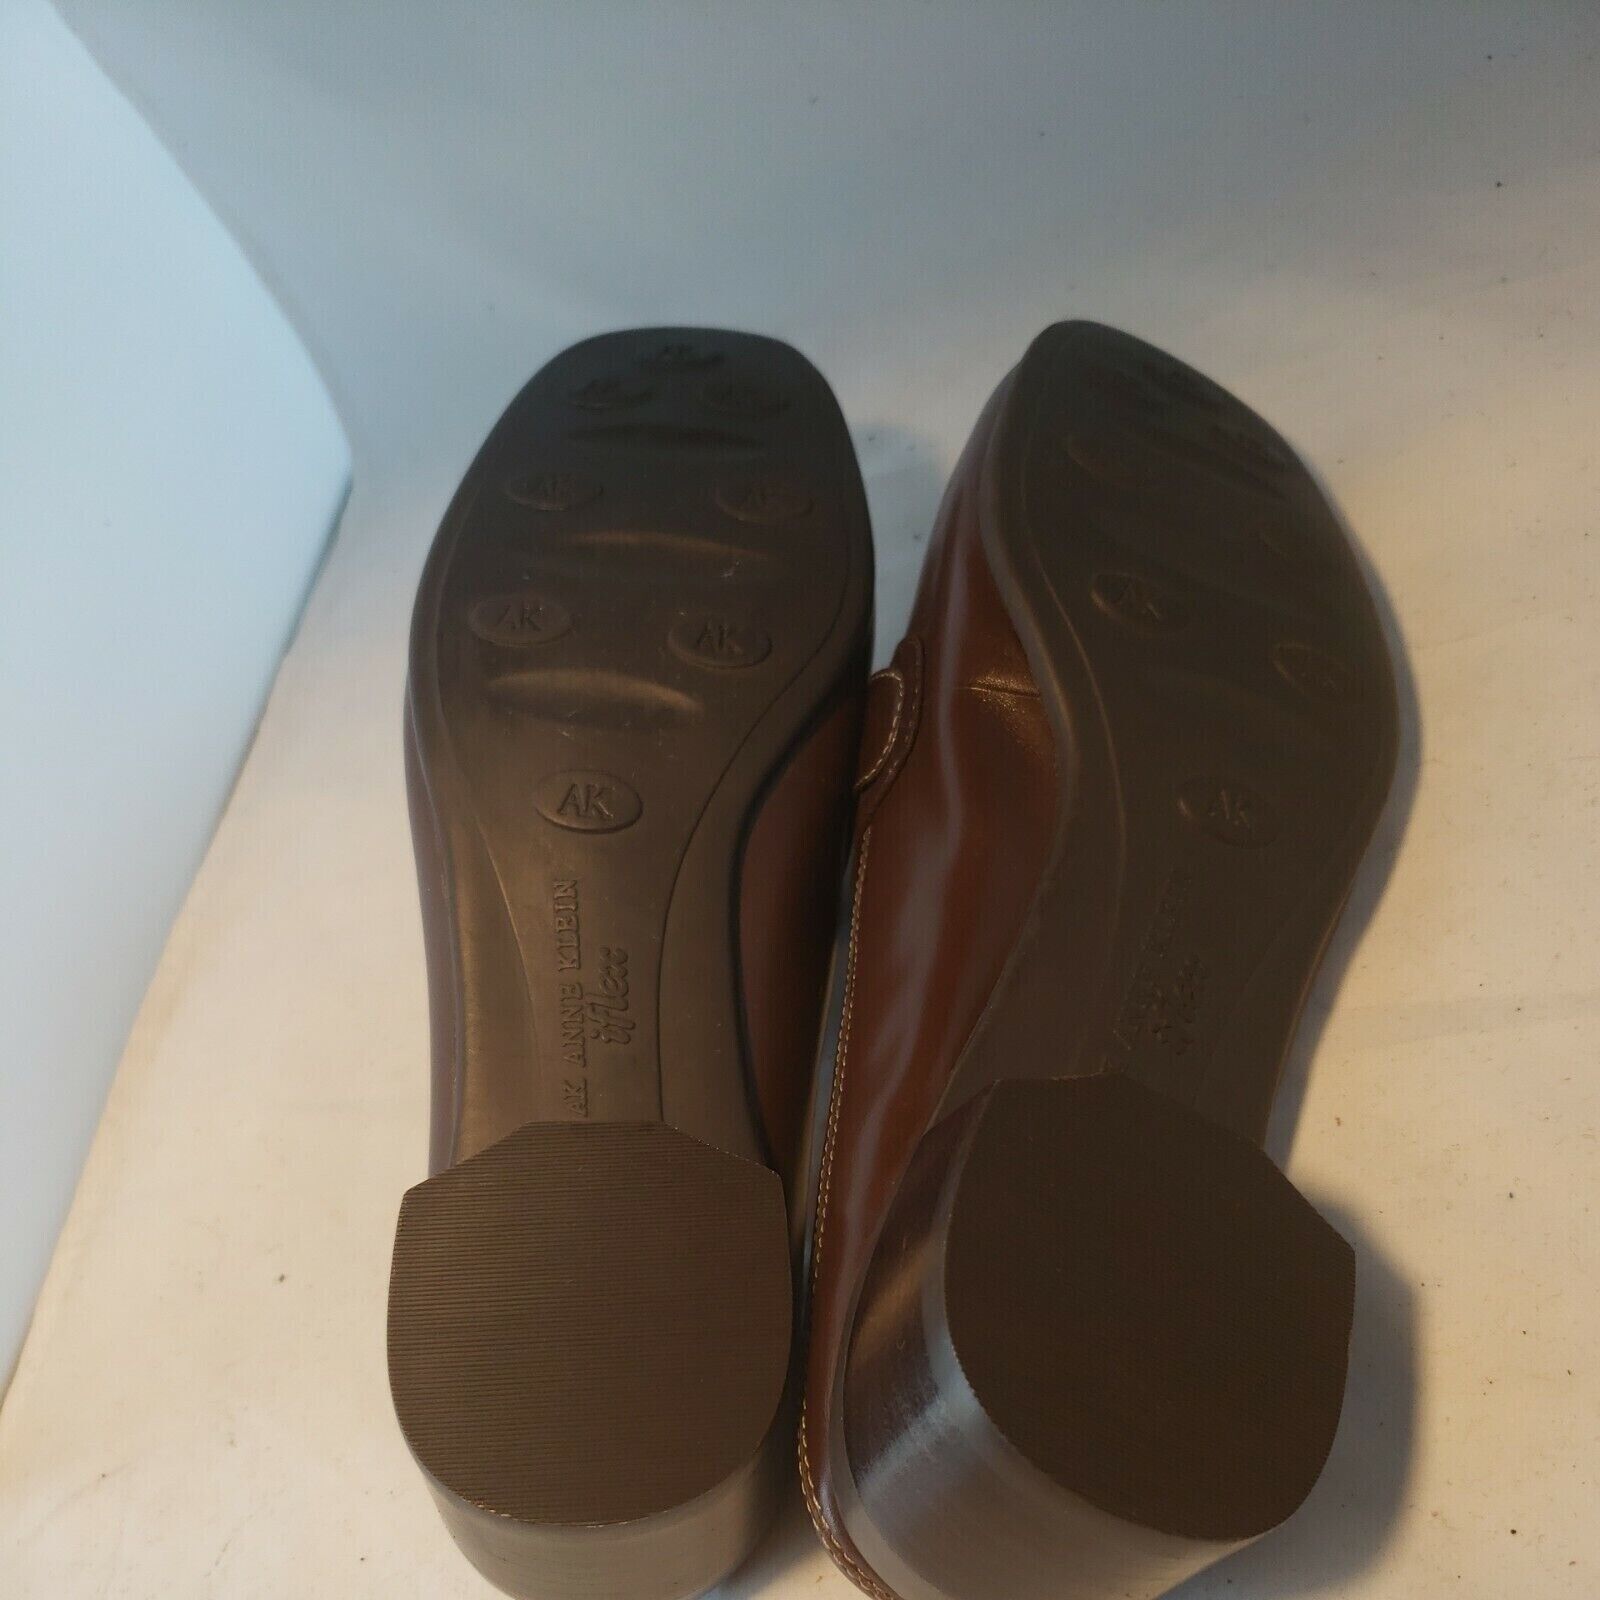 AK ANNE KLEIN iflex Brown Leather Side Mules Clogs Shoes Womens Size 7 M - Opticdeals